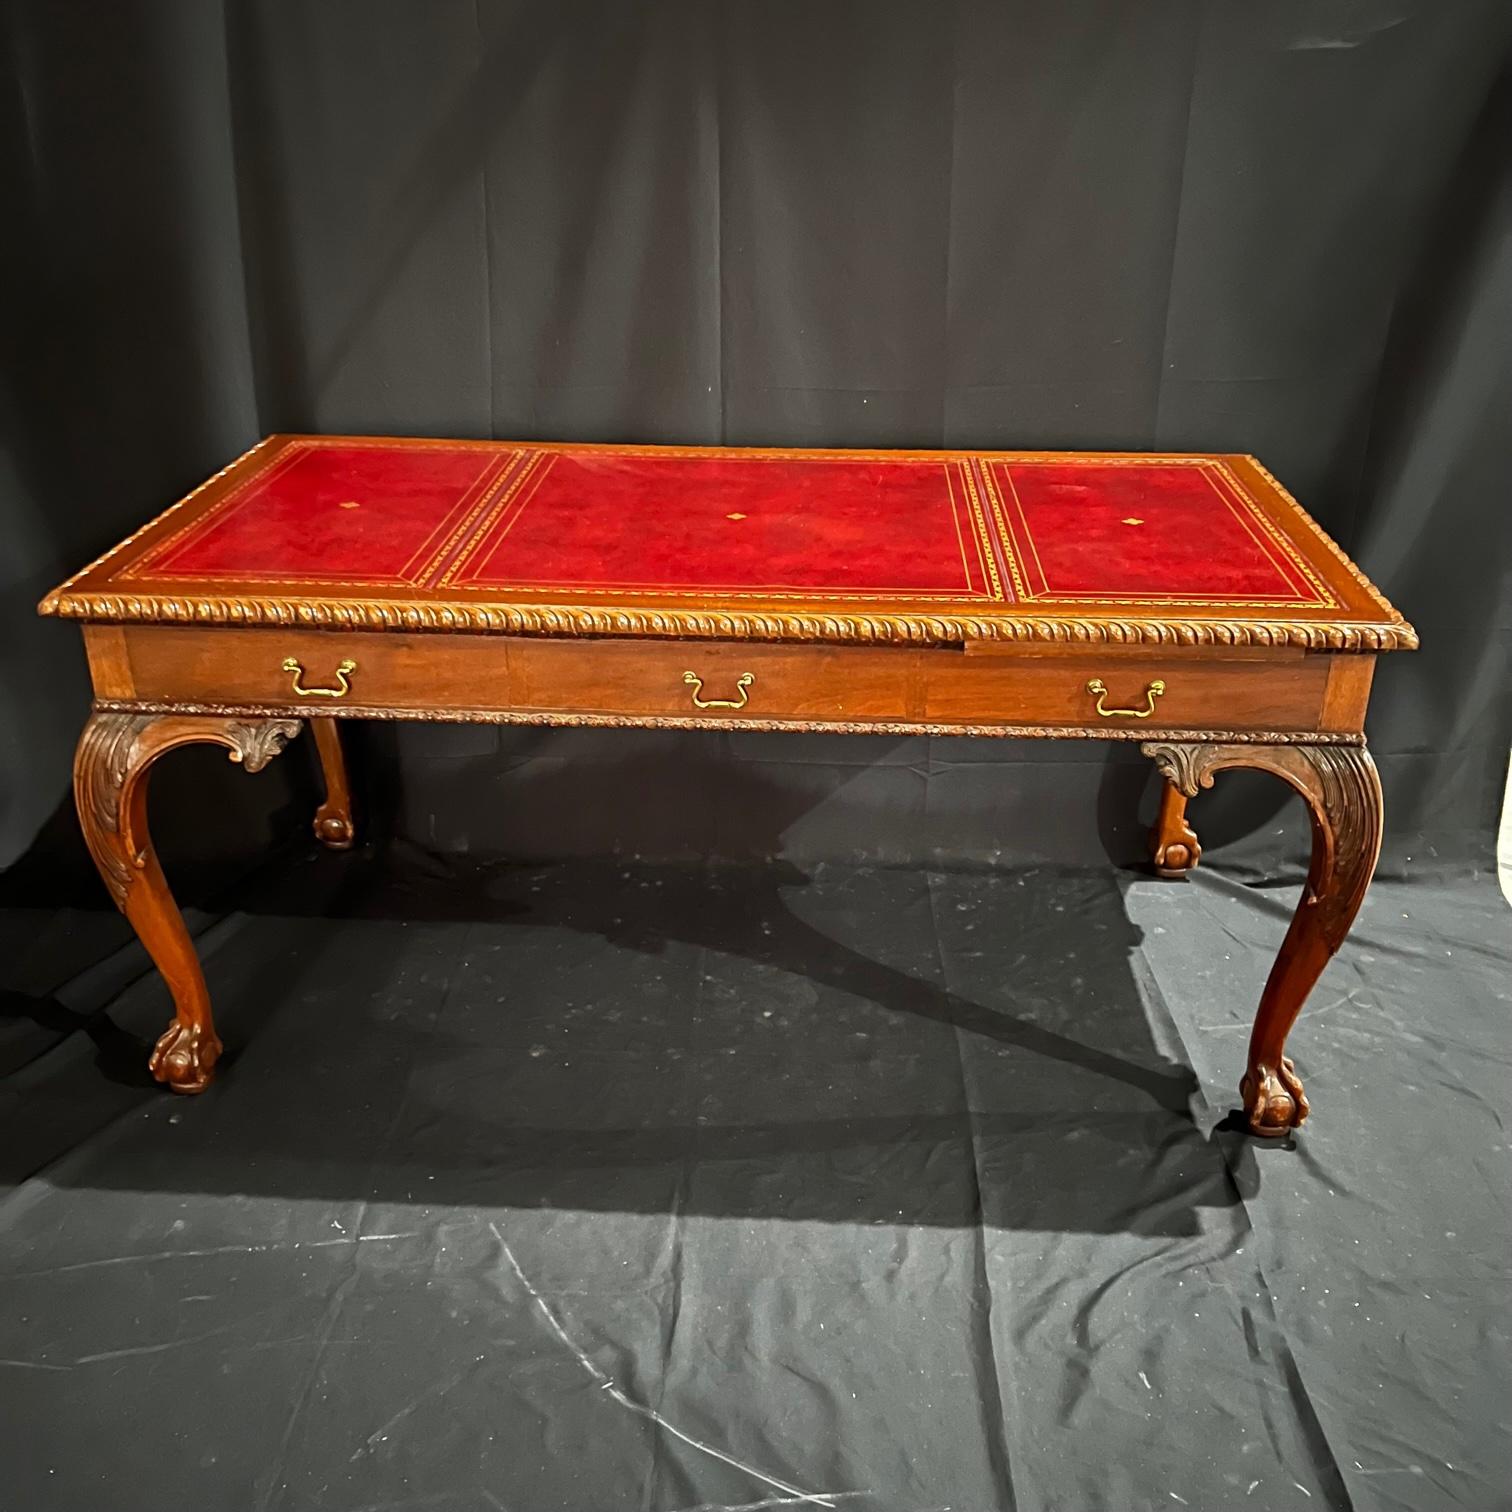 Lovely classic rectangular mahogany desk with claw & ball feet, cabriole shaped legs, beautiful carvings and long leaf extensions on the side and back. The decoration along the waist, upper part of the legs and on the edges of the upper board in the